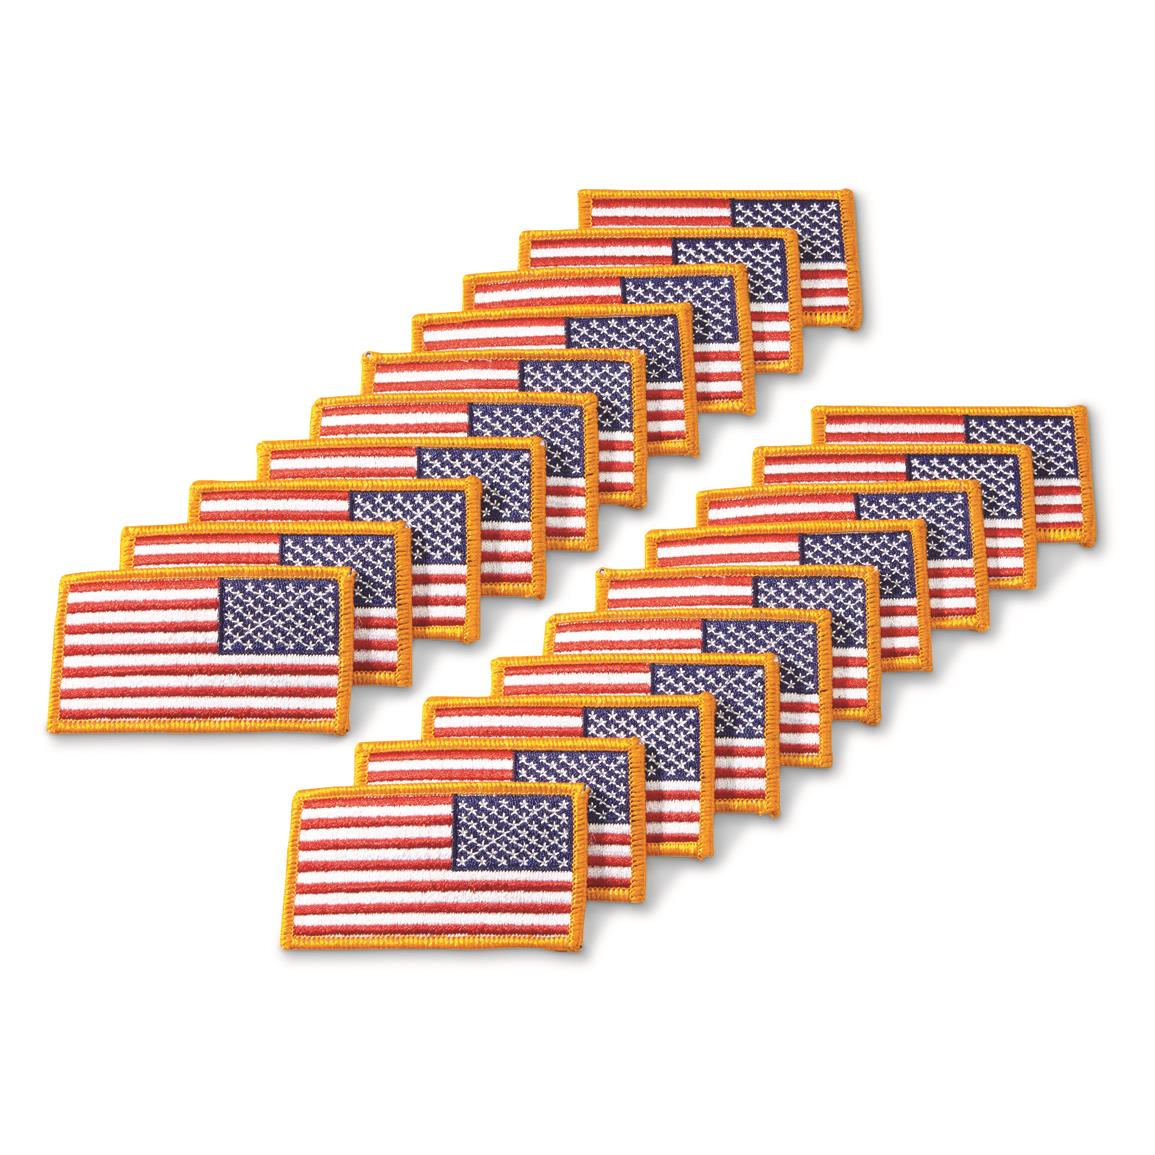 US military Right Hand Flag Patch 20pk New, Red/White/Blue